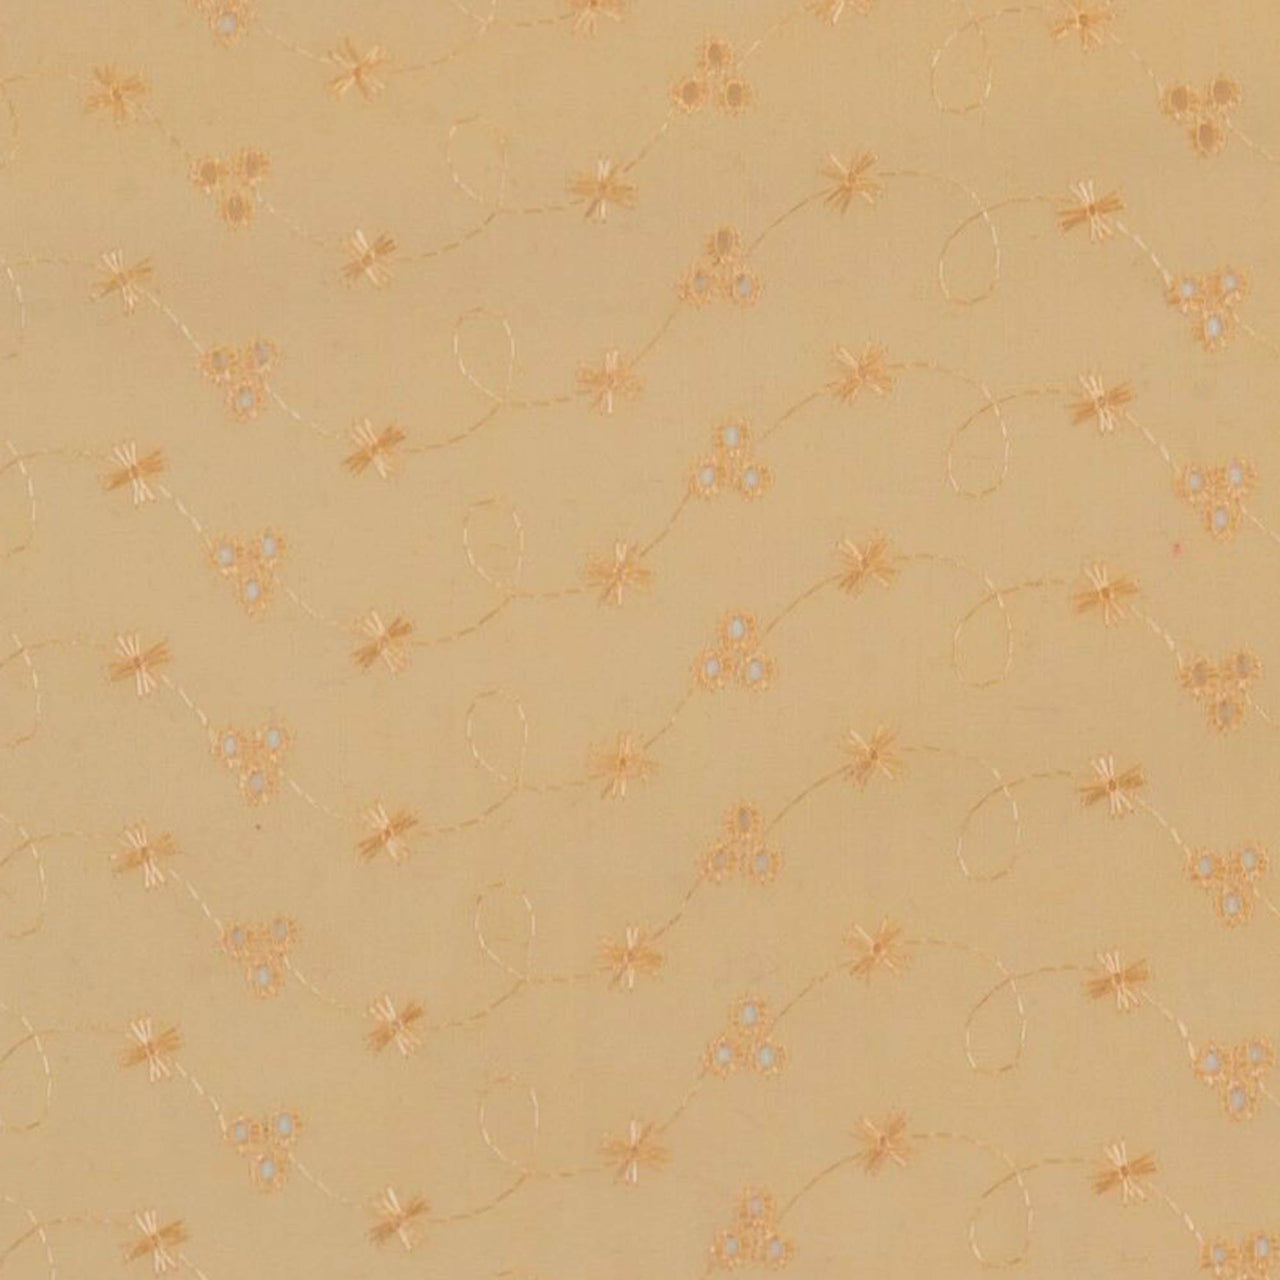 Peach - Broderie Anglaise - 3 Hole Embroidered Poly Cotton Fabric